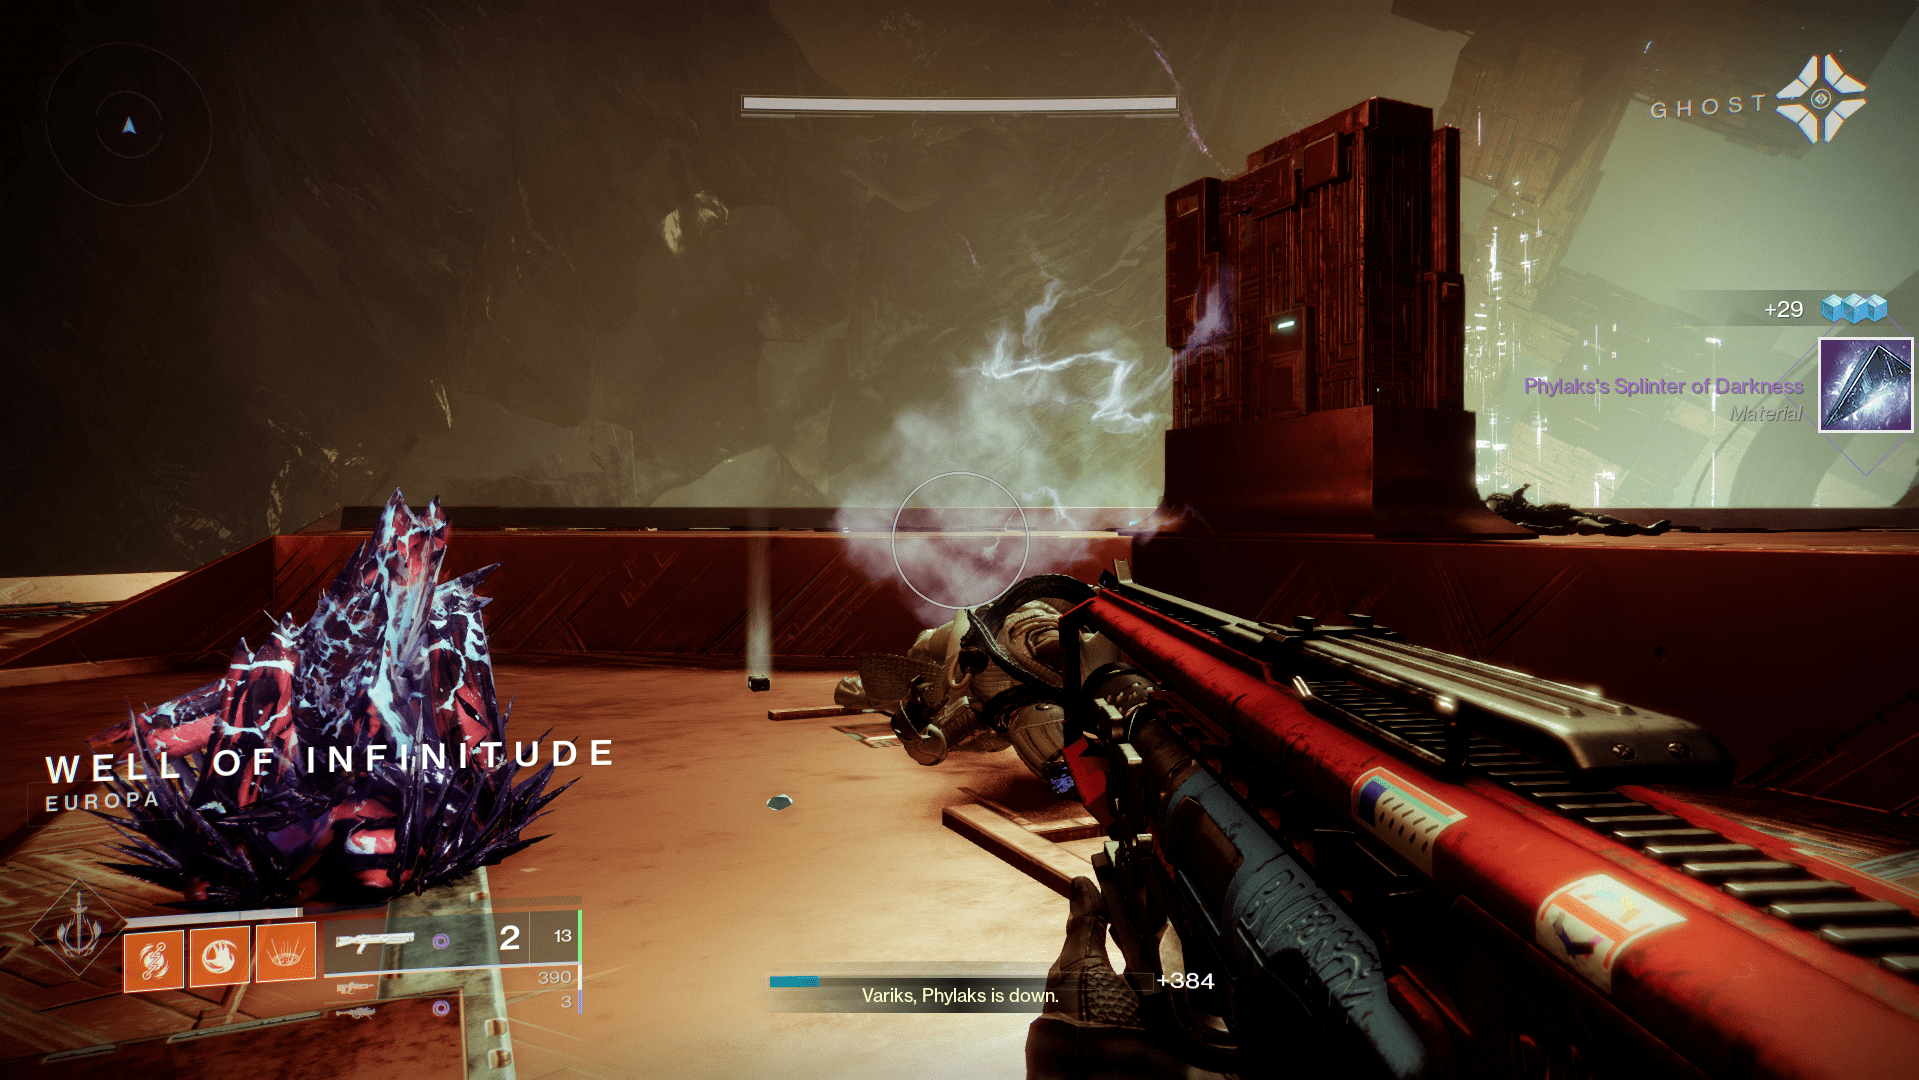 I will say that I did feel an emotion here: infinite rage. Fuck Phylaks. (Screenshot: Bungie)